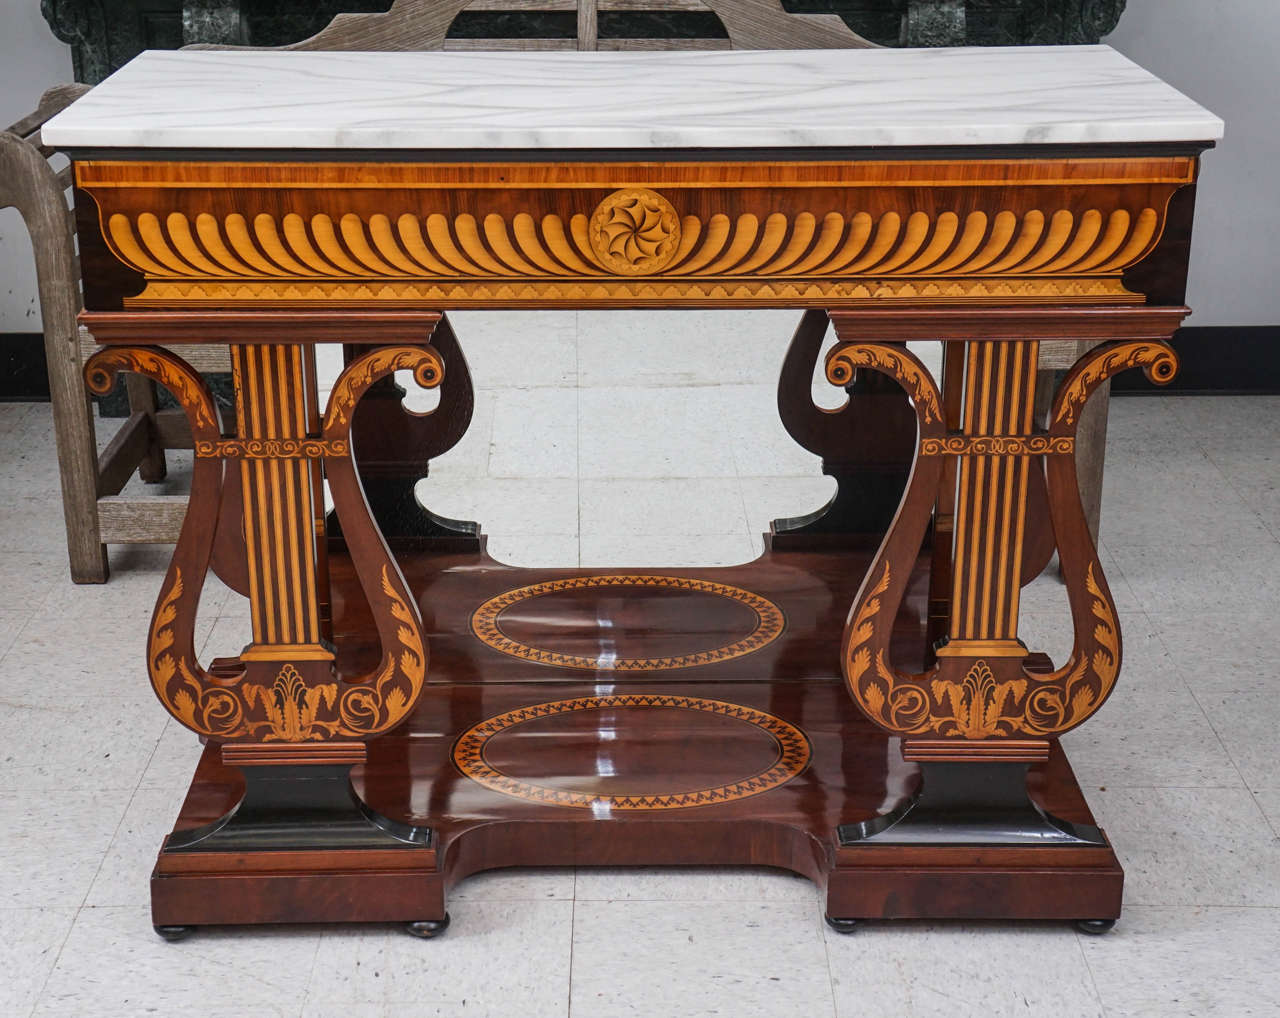 This finely crafted console is Austrian, circa 1830-1840. Designed as a flat mahogany surface richly inlaid in holly, fruitwood, and ebony the piece is further worked by careful sand burning creating a full trompe l'oeil articulated shading. The